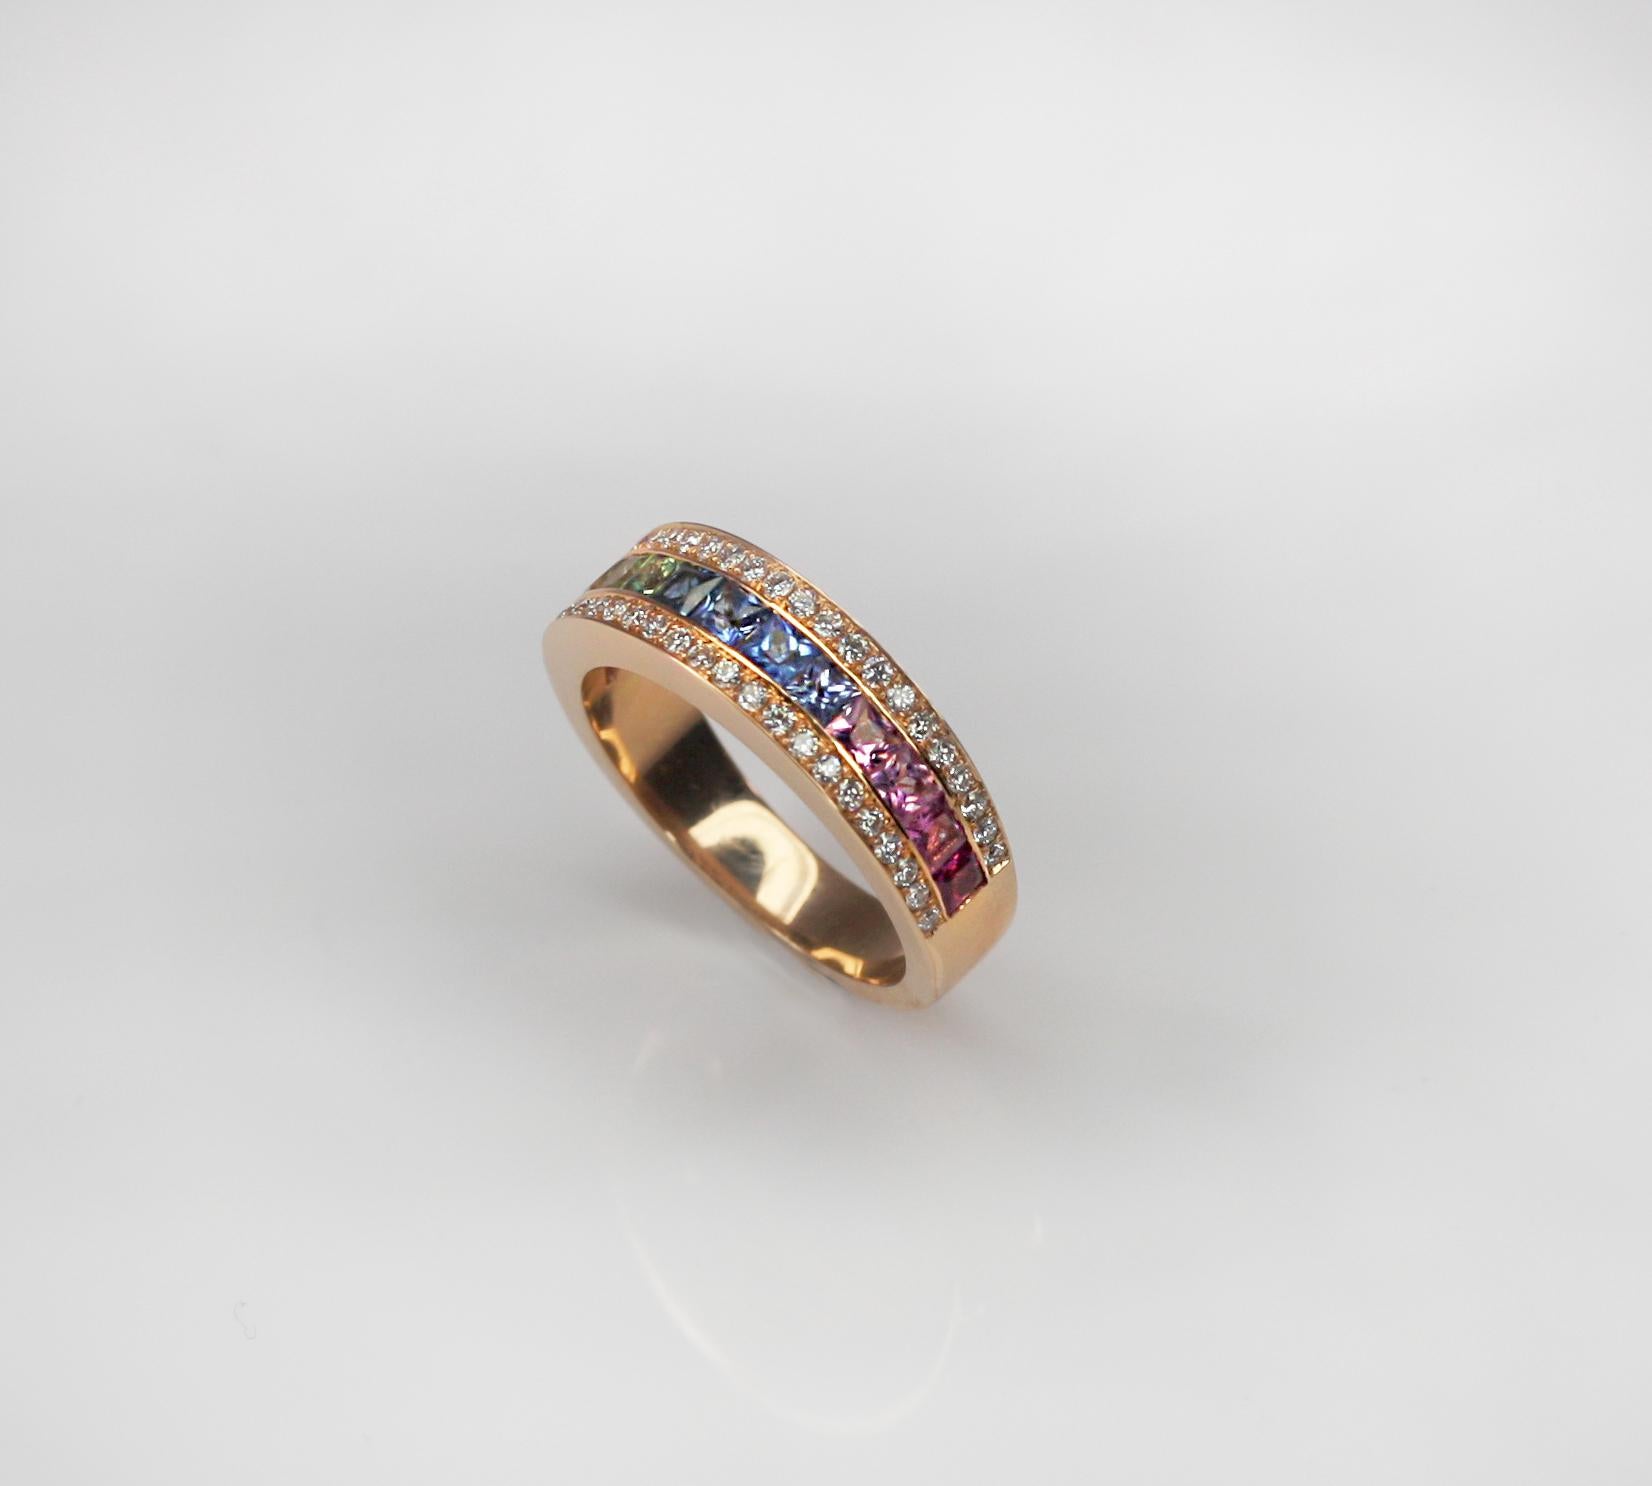 This S. Georgios designer Multicolor Band Ring in Rose Gold 18 Karat is all hand made with microscopic channel settings. This gorgeous band features princess cut multicolor natural Sapphires total weight 1.55 Carat, surrounded by 2 rows of brilliant